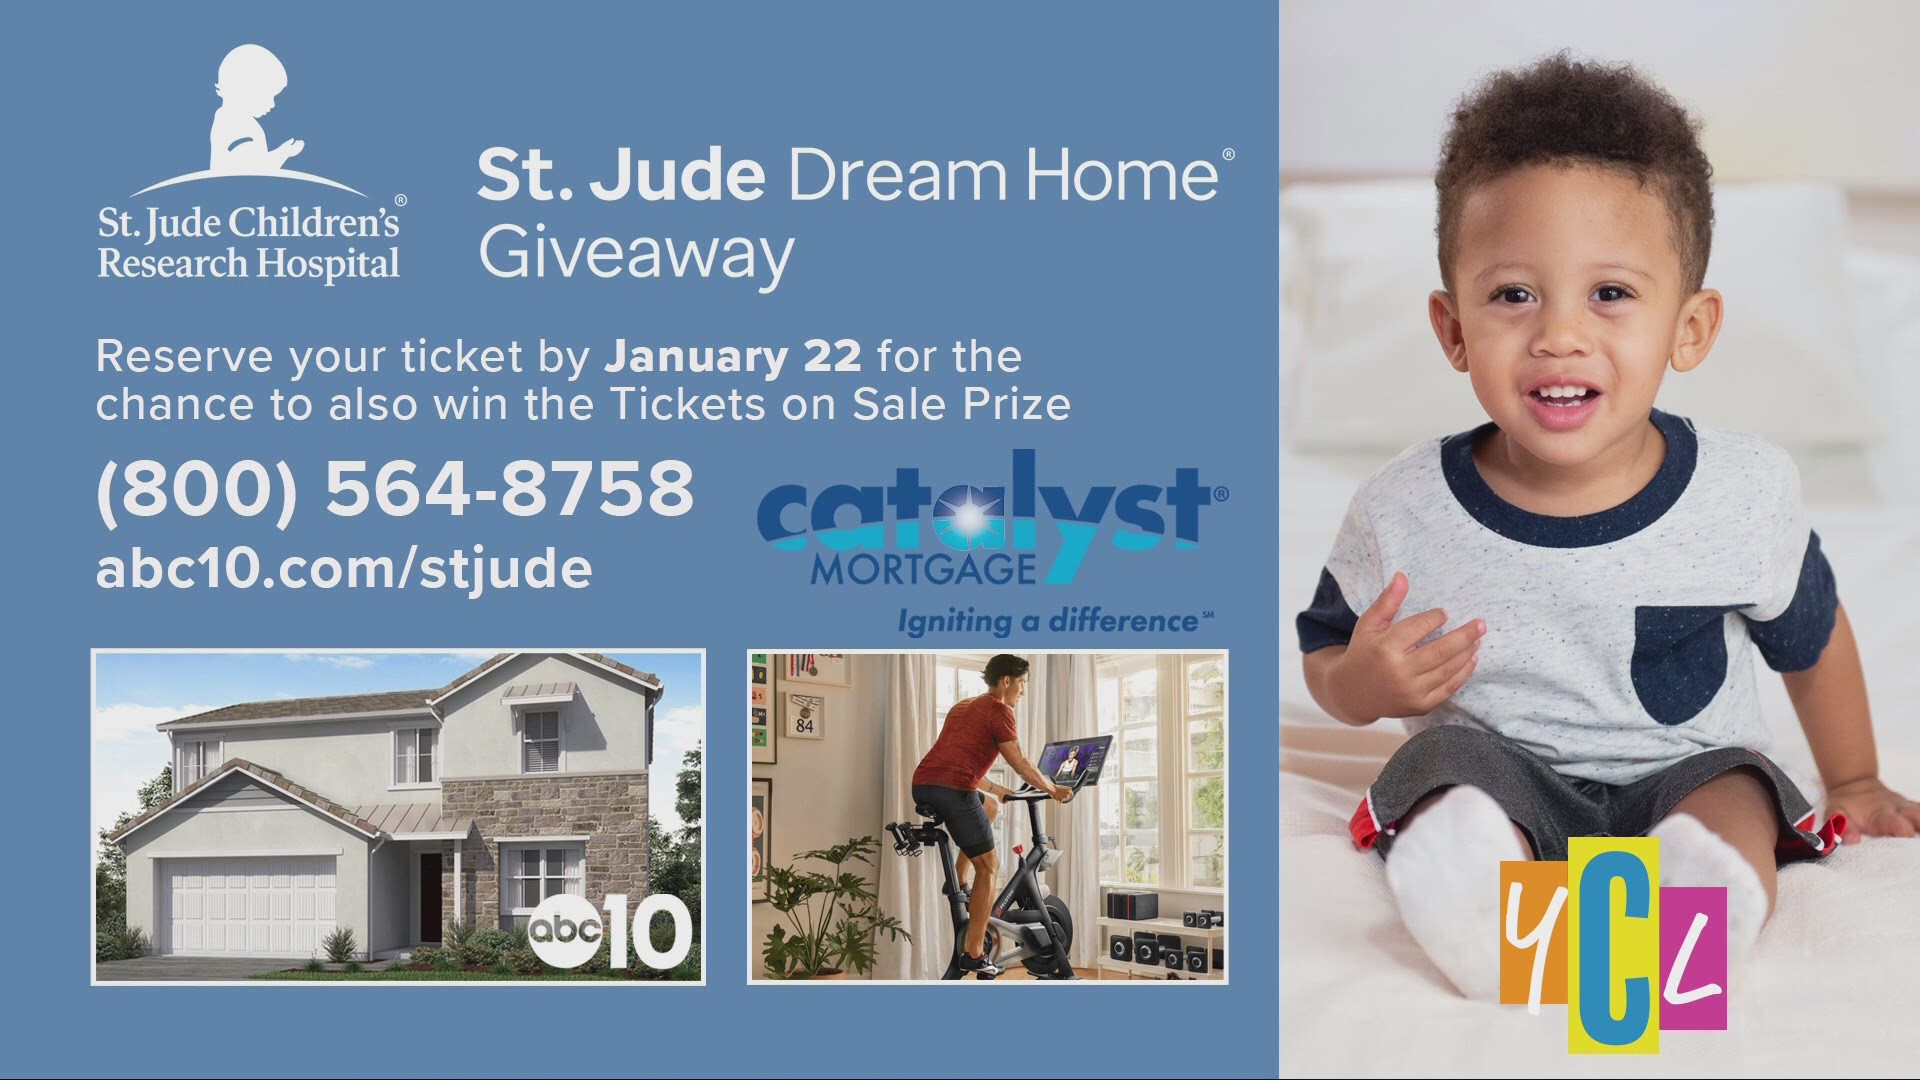 Catalyst Mortgage talks about their partnership in the St. Jude Dream Home Giveaway. This segment was paid for by St. Jude Children’s Research Hospital.